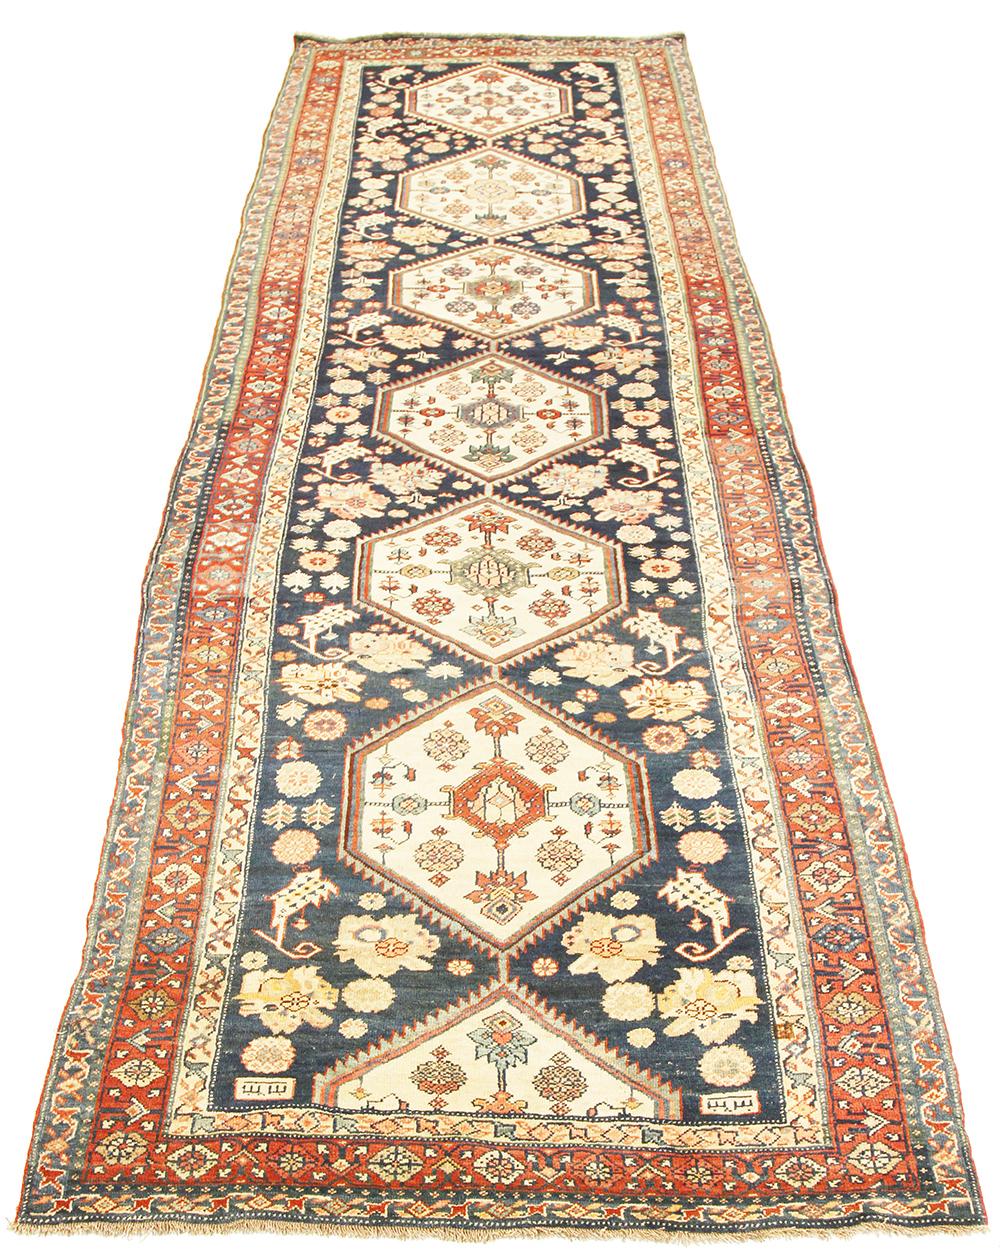 Antique Persian runner rug handwoven from the finest sheep’s wool and colored with all-natural vegetable dyes that are safe for humans and pets. It’s a traditional Bijar design featuring colored floral details inside ivory medallions on a navy blue